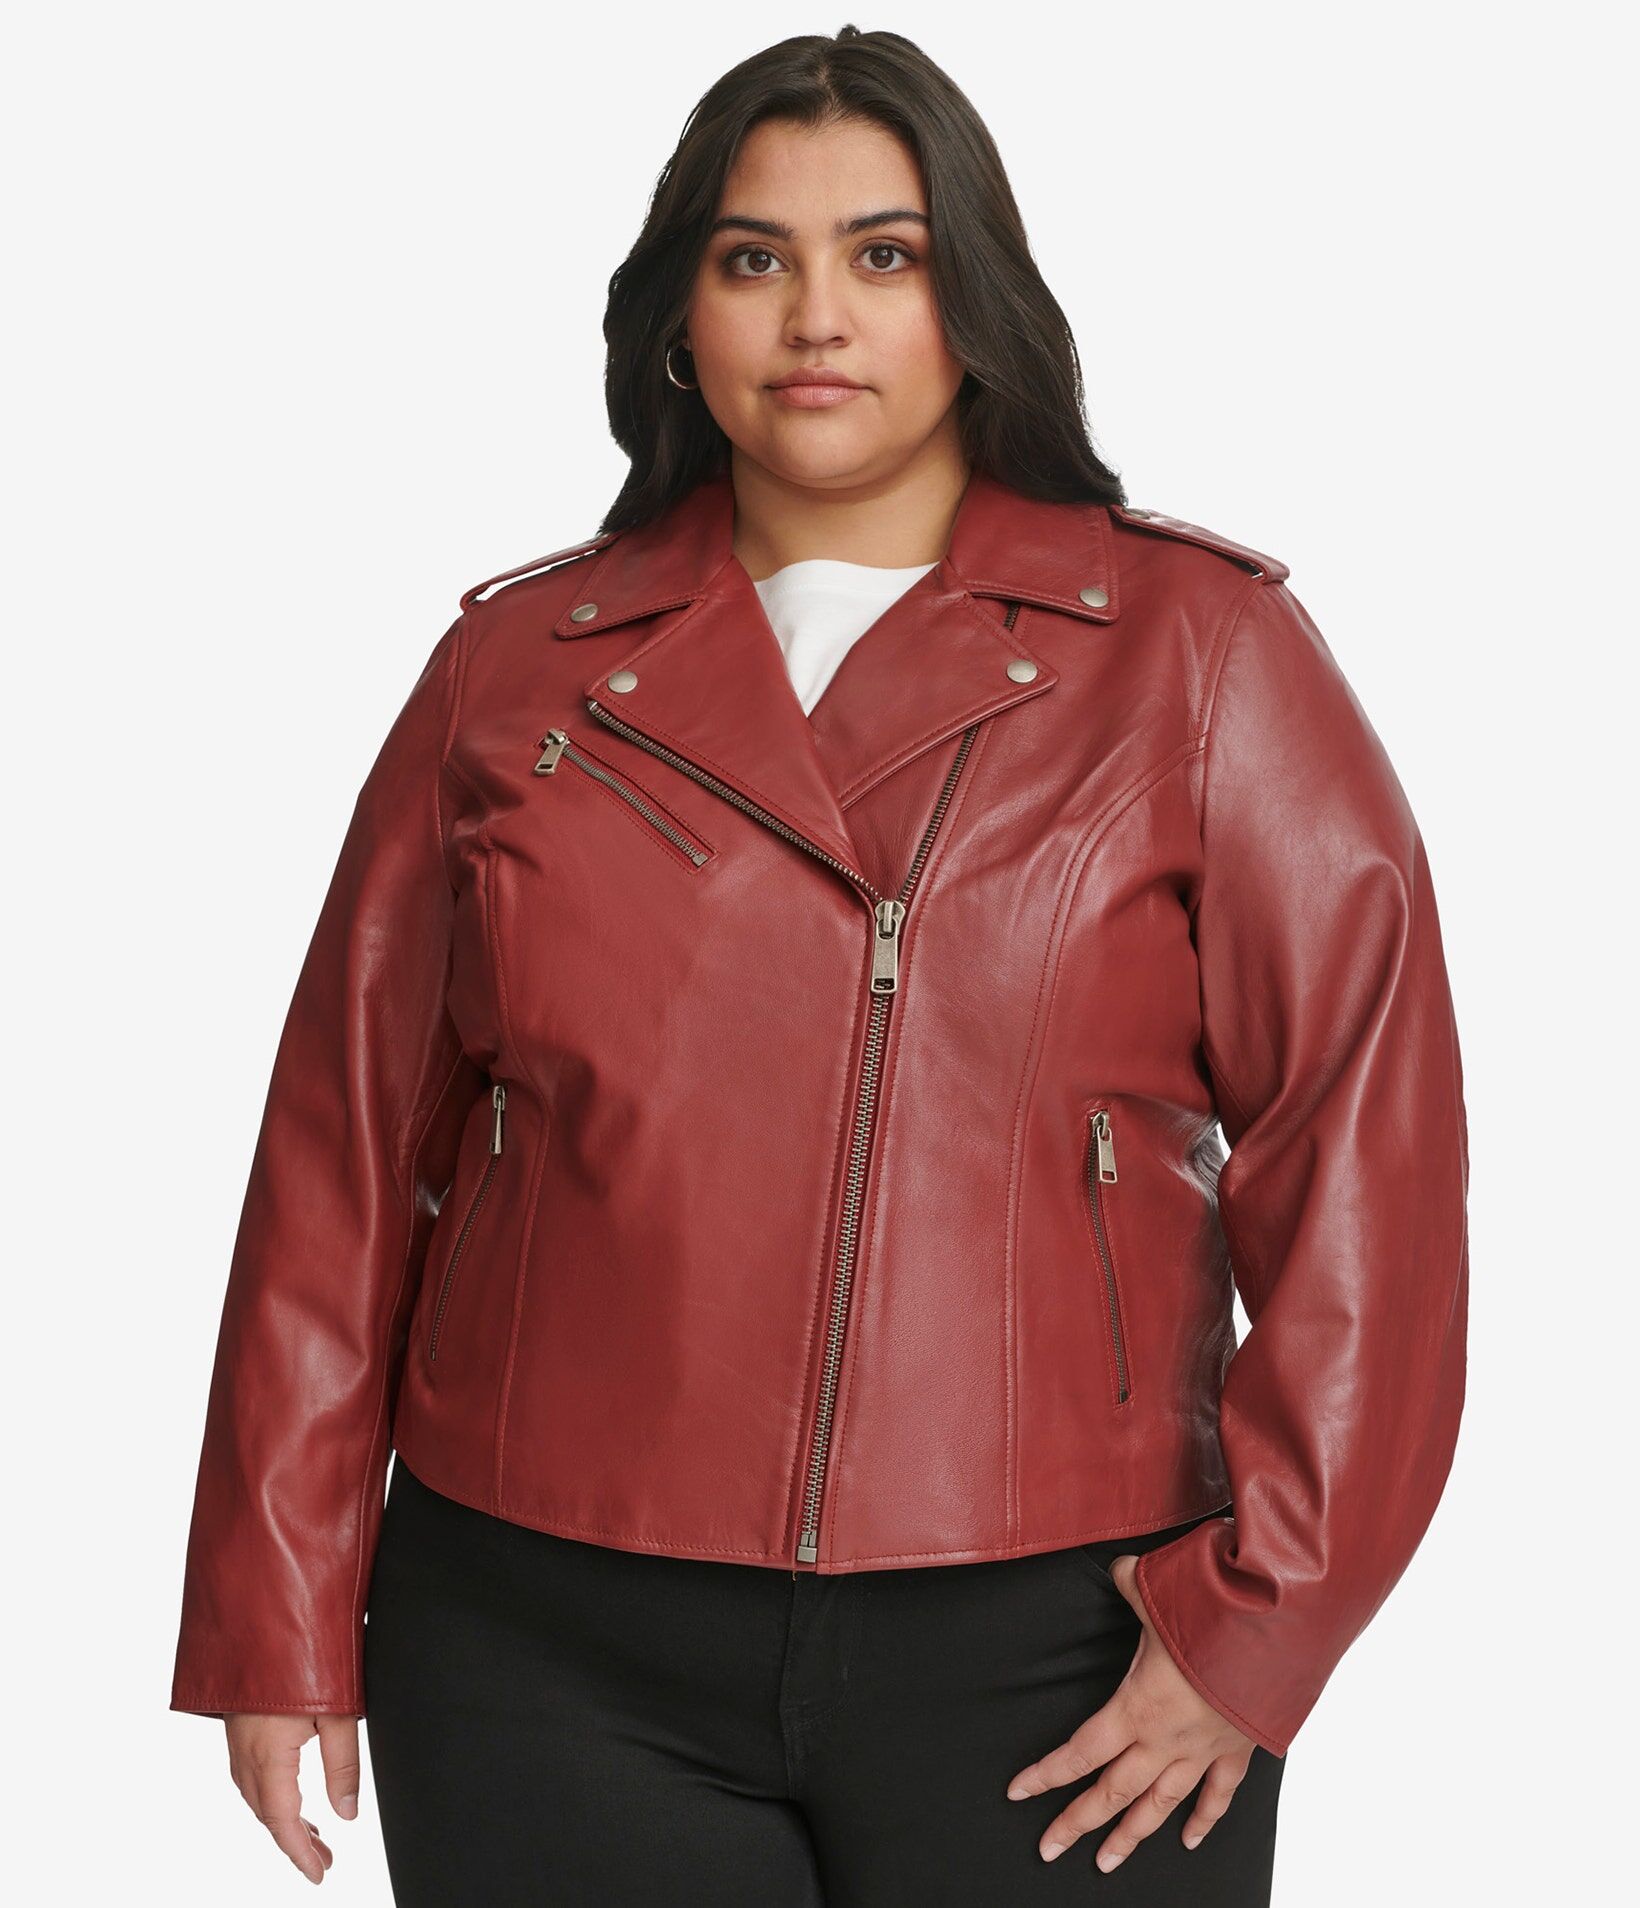 Wilsons Leather   Women's Plus Size Madeline Asymmetrical Leather Jacket   Red   2X